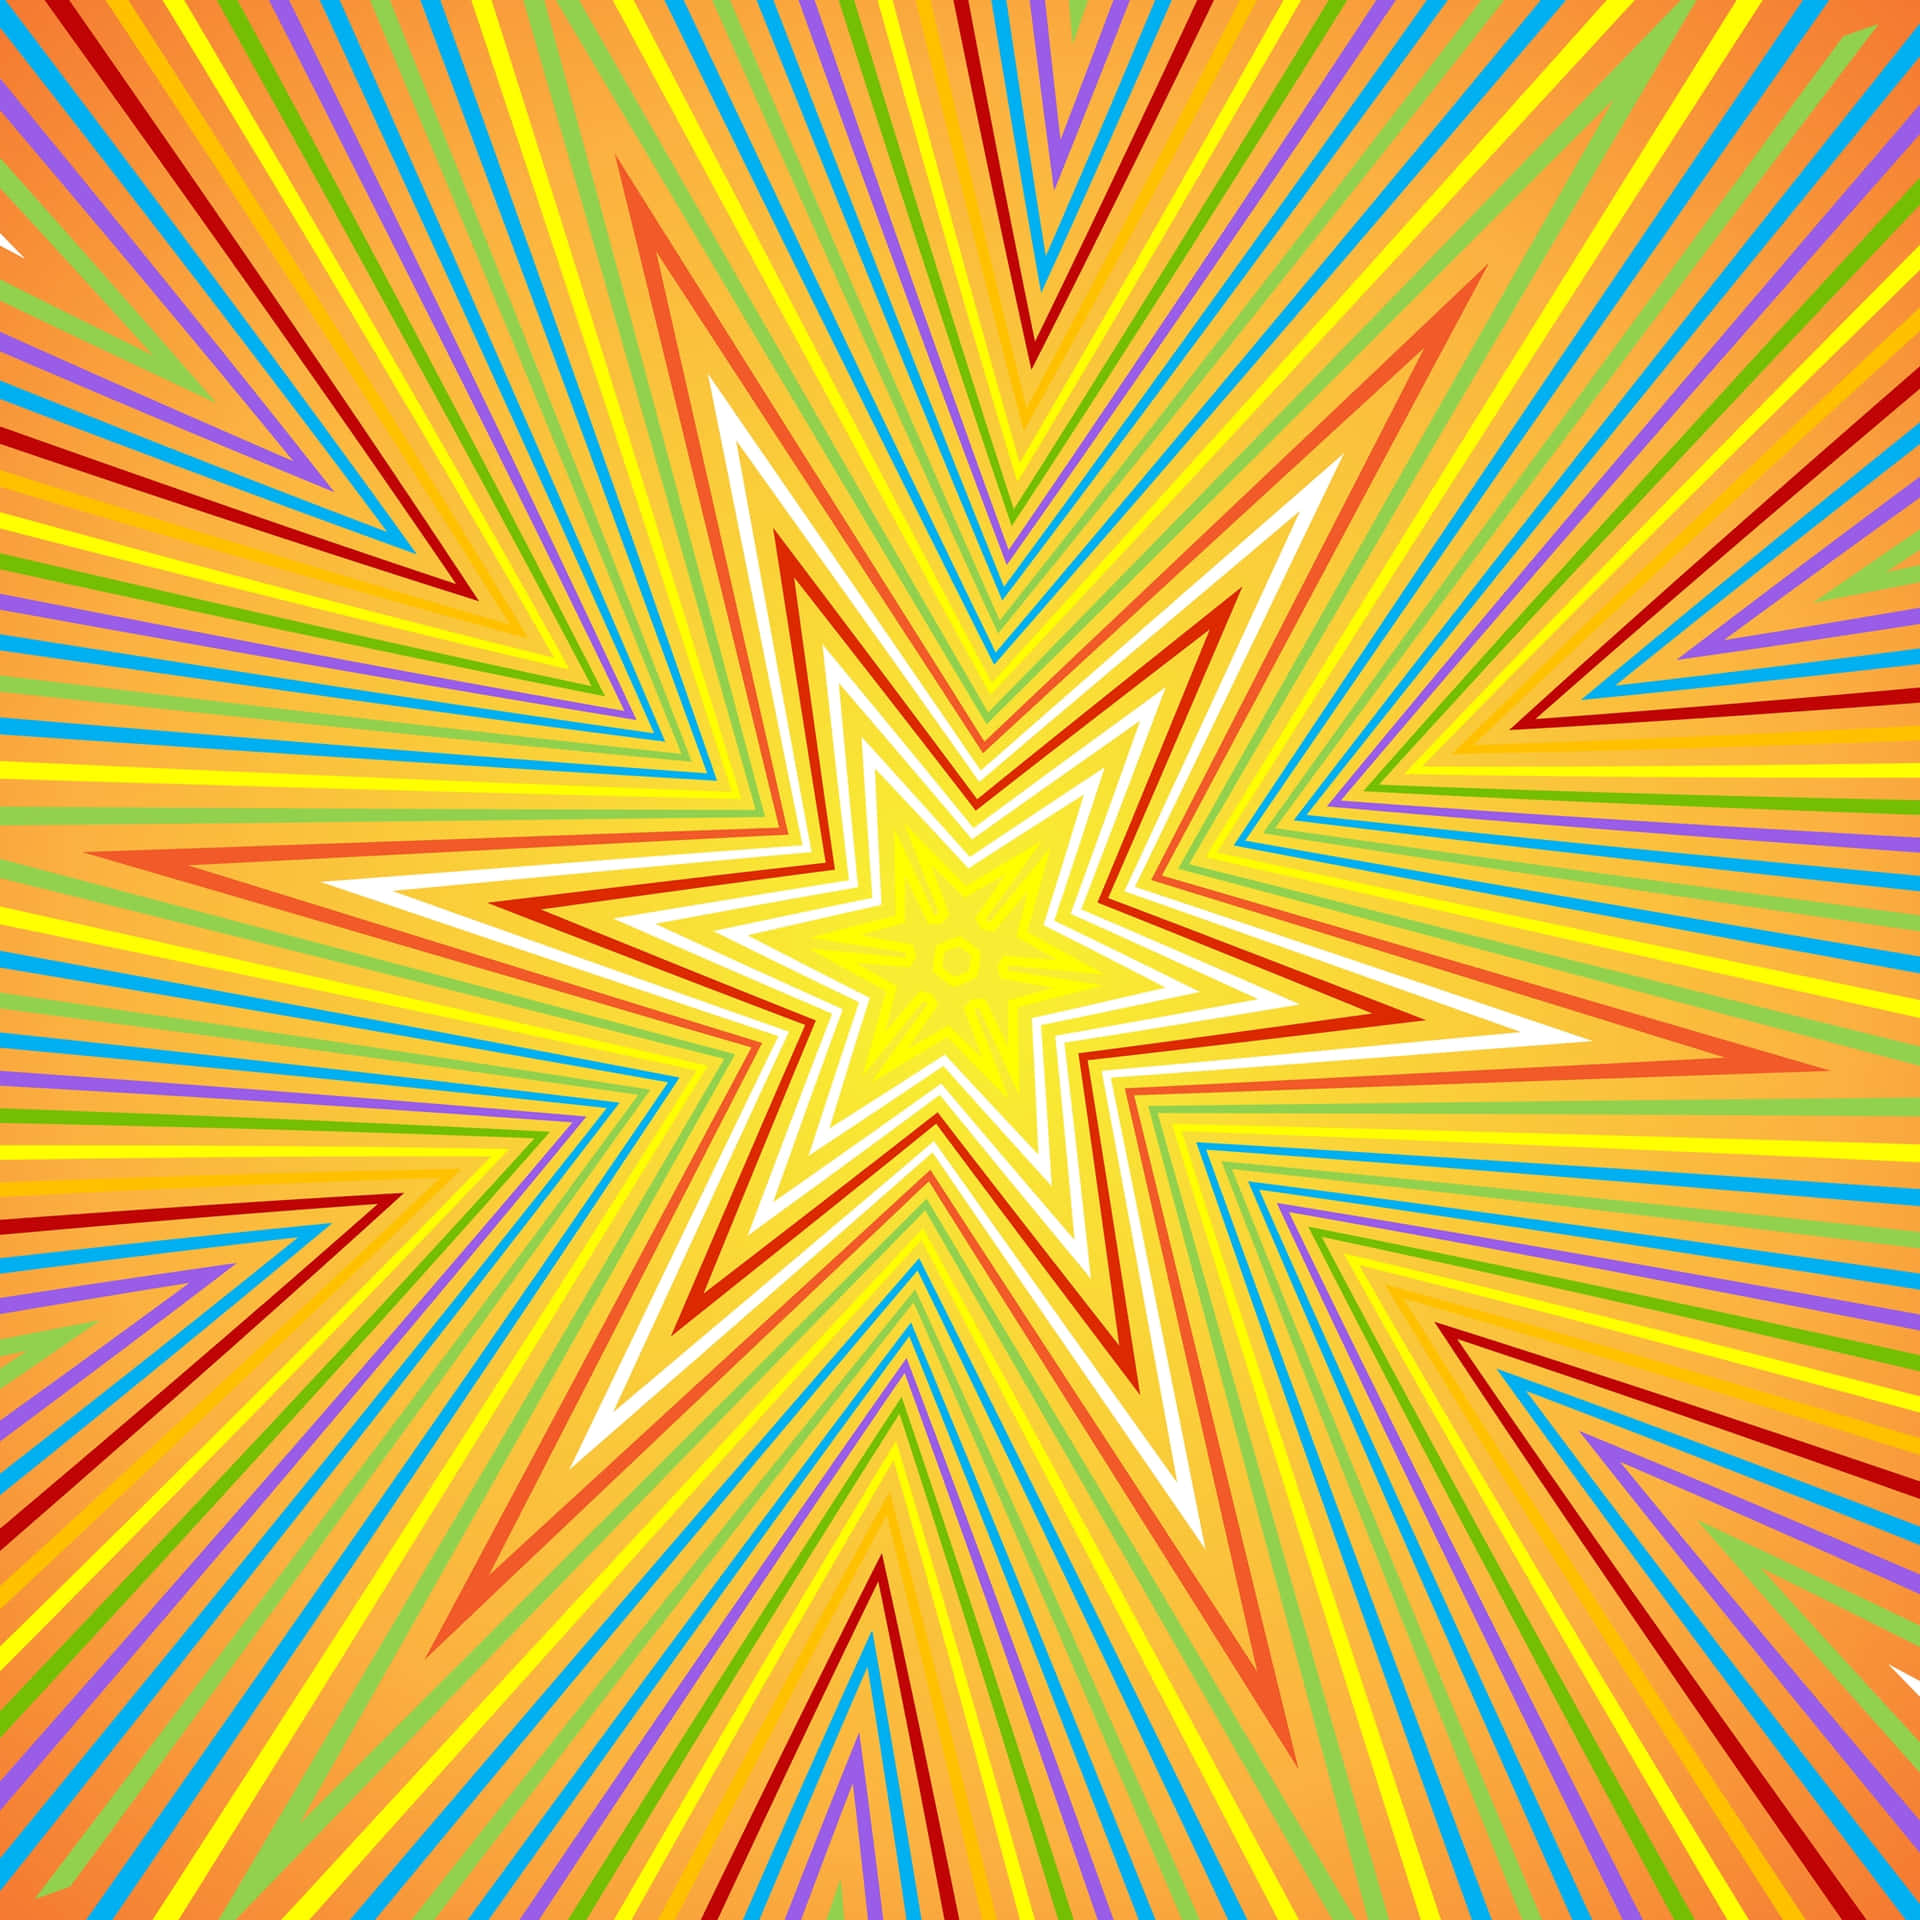 A Colorful Starburst Background With A Rainbow Background